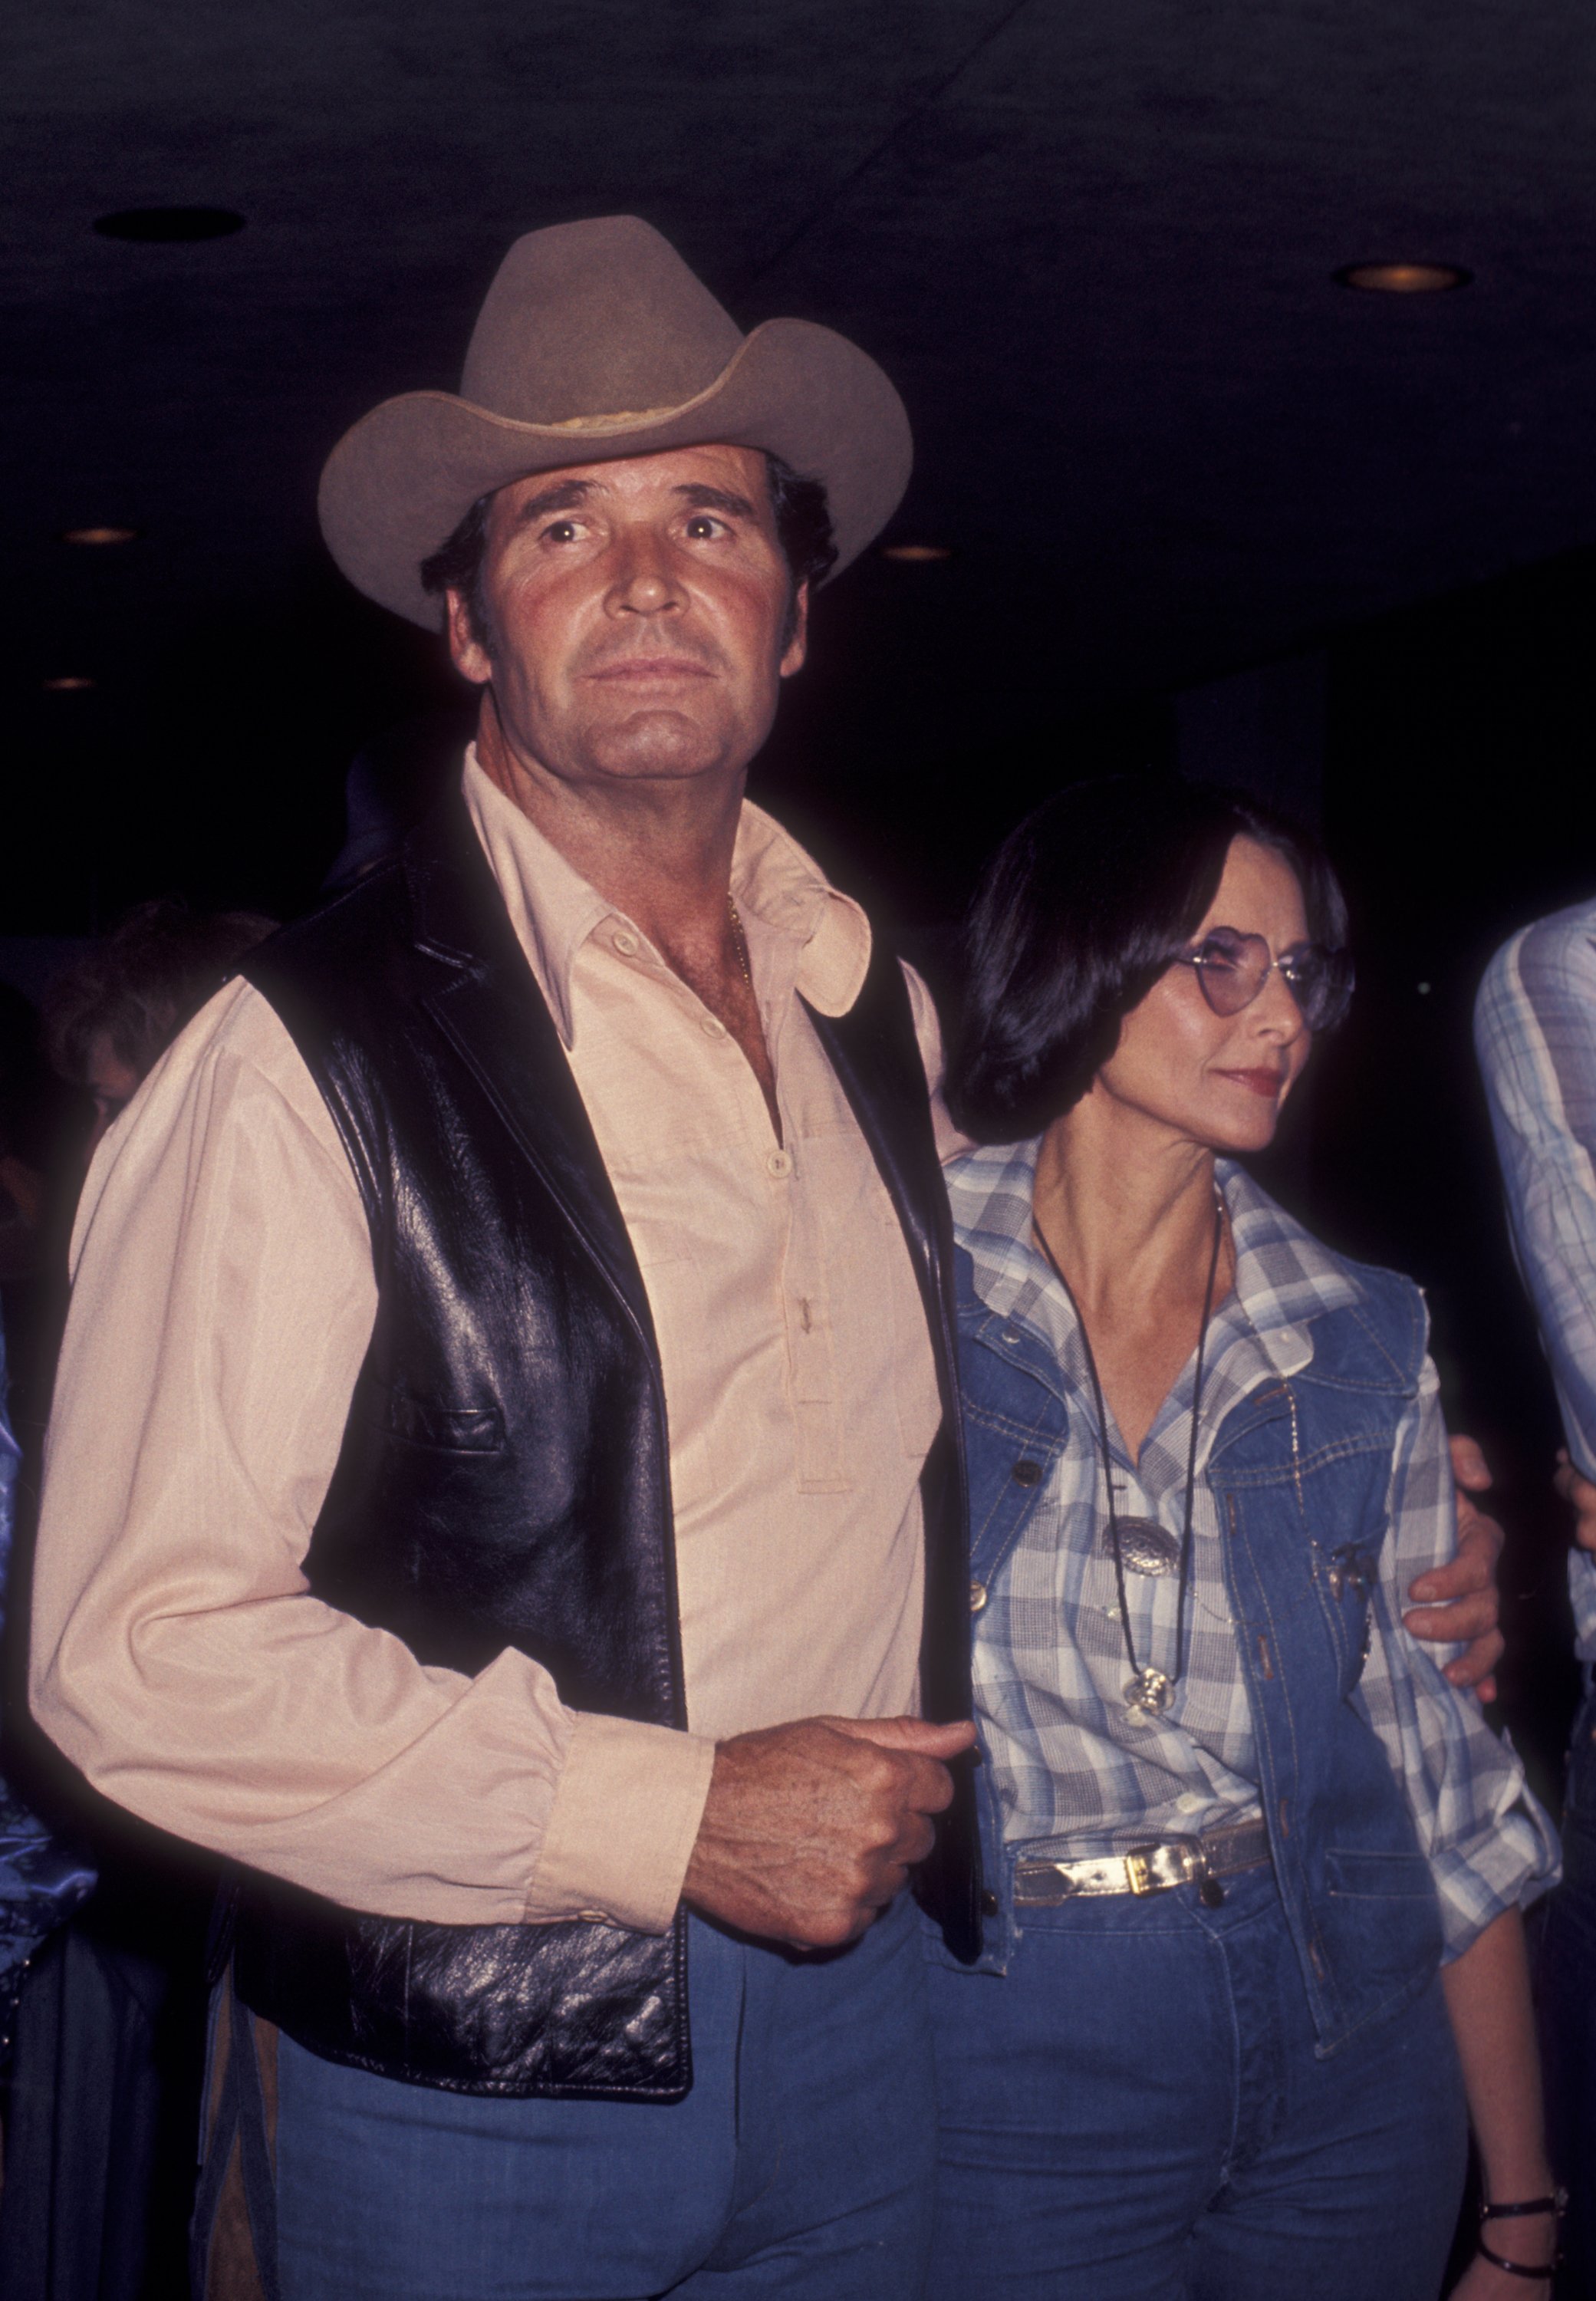 Actor James Garner and wife Lois Clarke attend 24th Annual SHARE Boomtown Party on May 21, 1977 at the Santa Monica Civic Auditorium in Santa Monica, California | Source: Getty Images